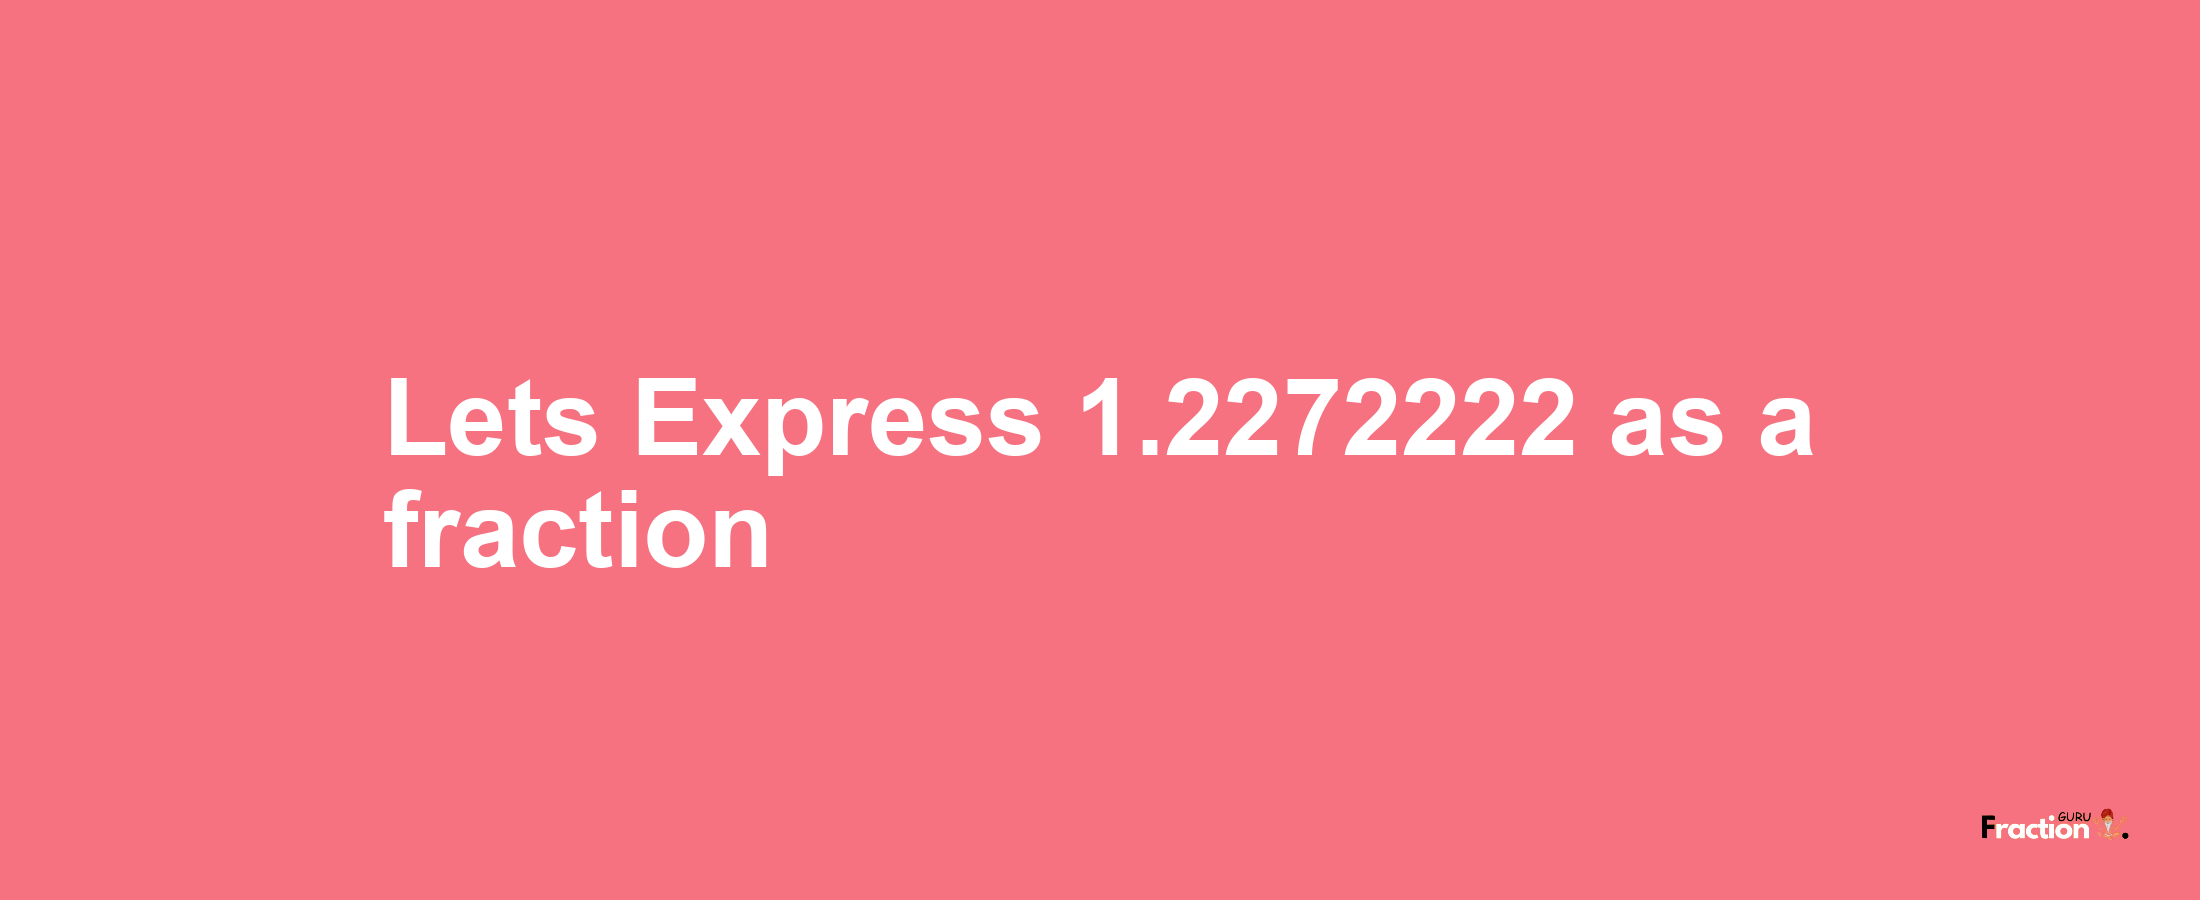 Lets Express 1.2272222 as afraction